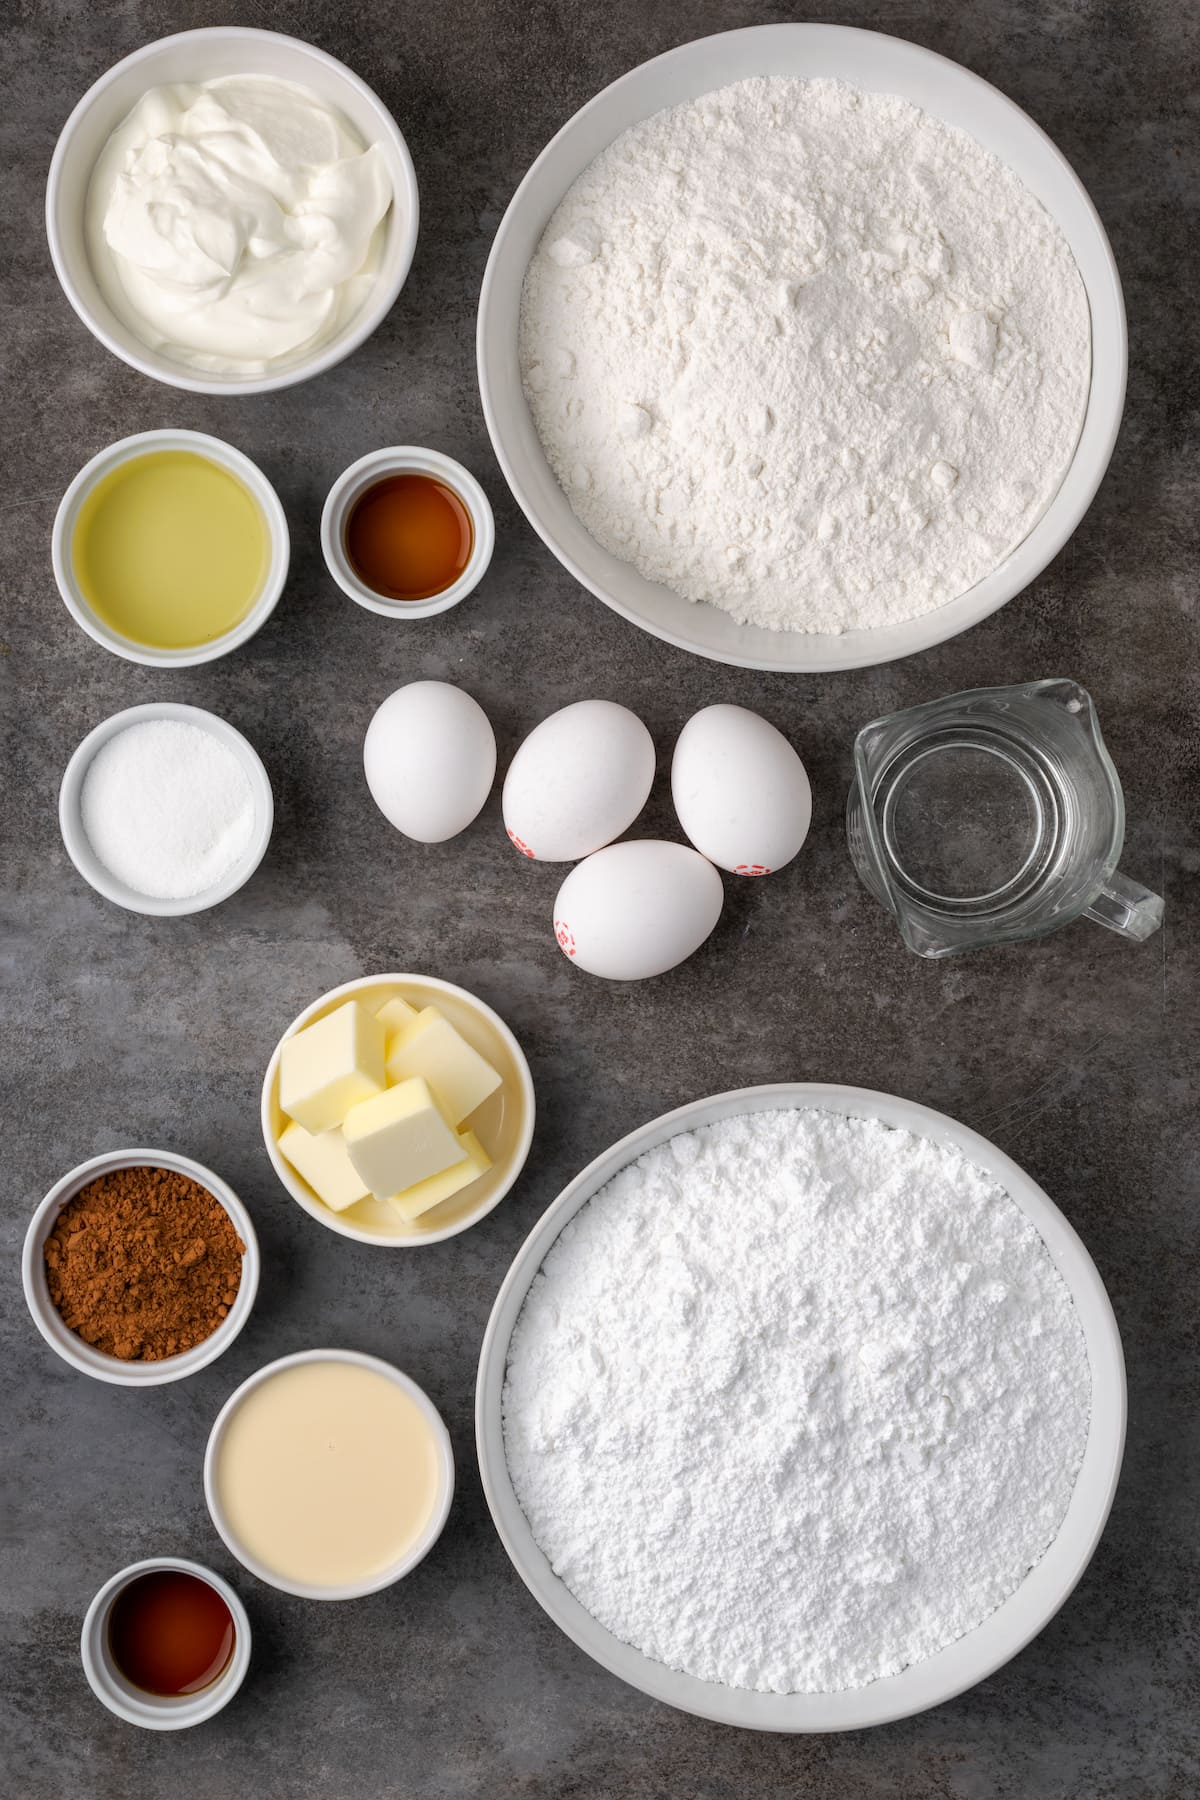 The ingredients for sour cream cake with chocolate frosting.